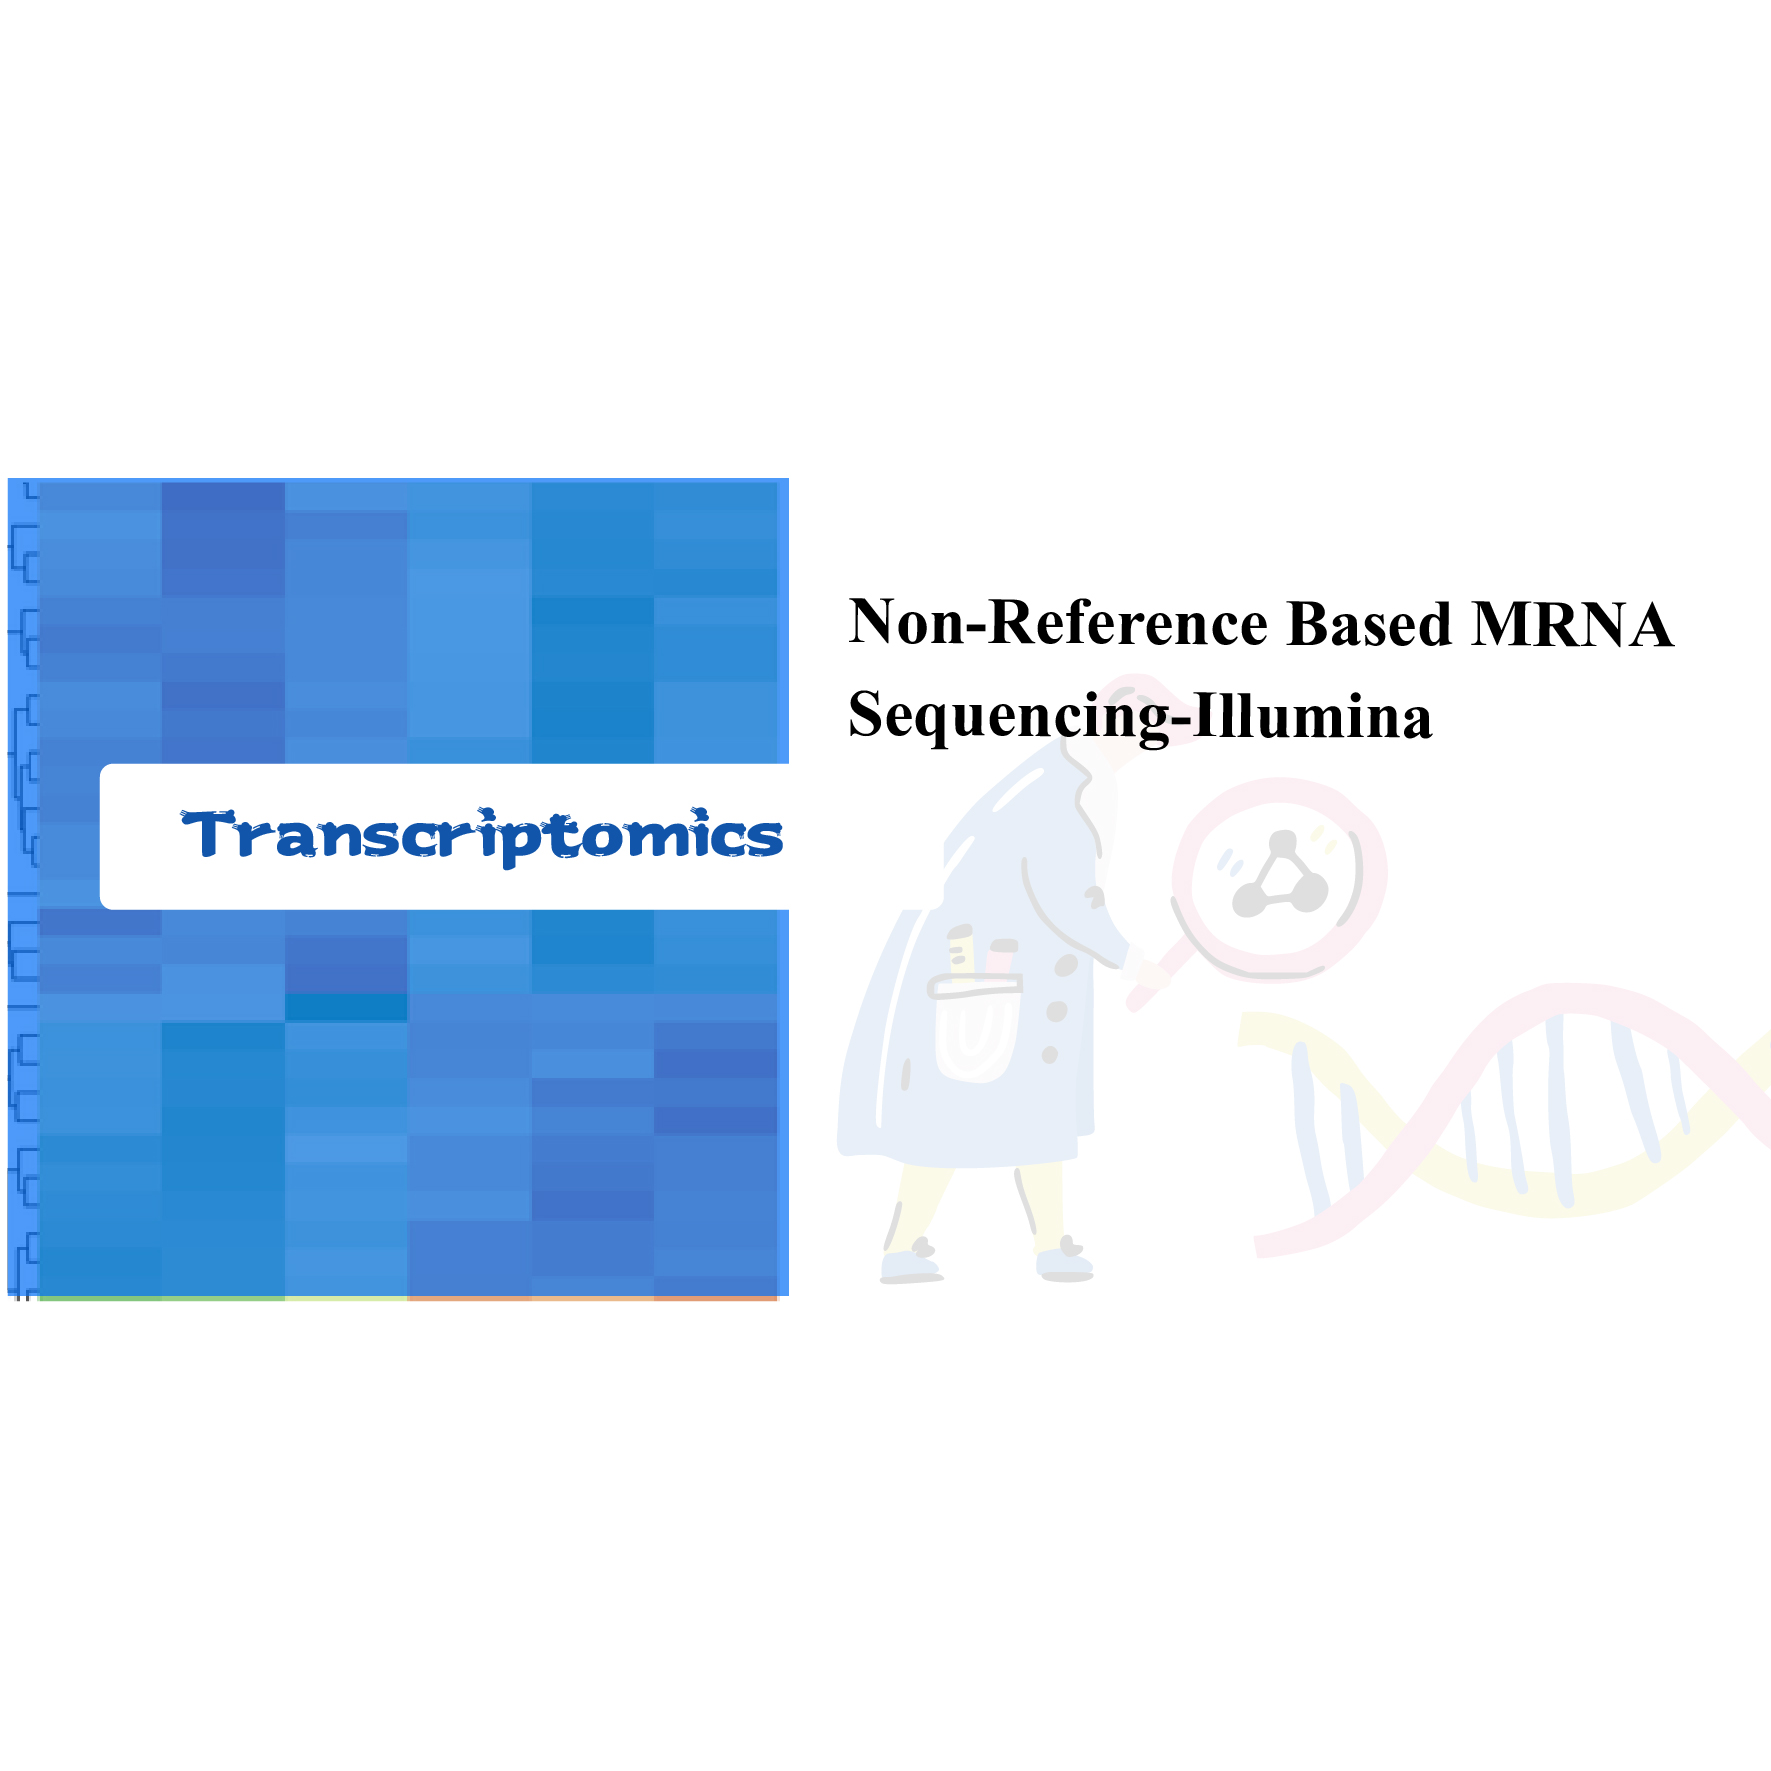 Non-Reference based mRNA Sequencing-Illumina